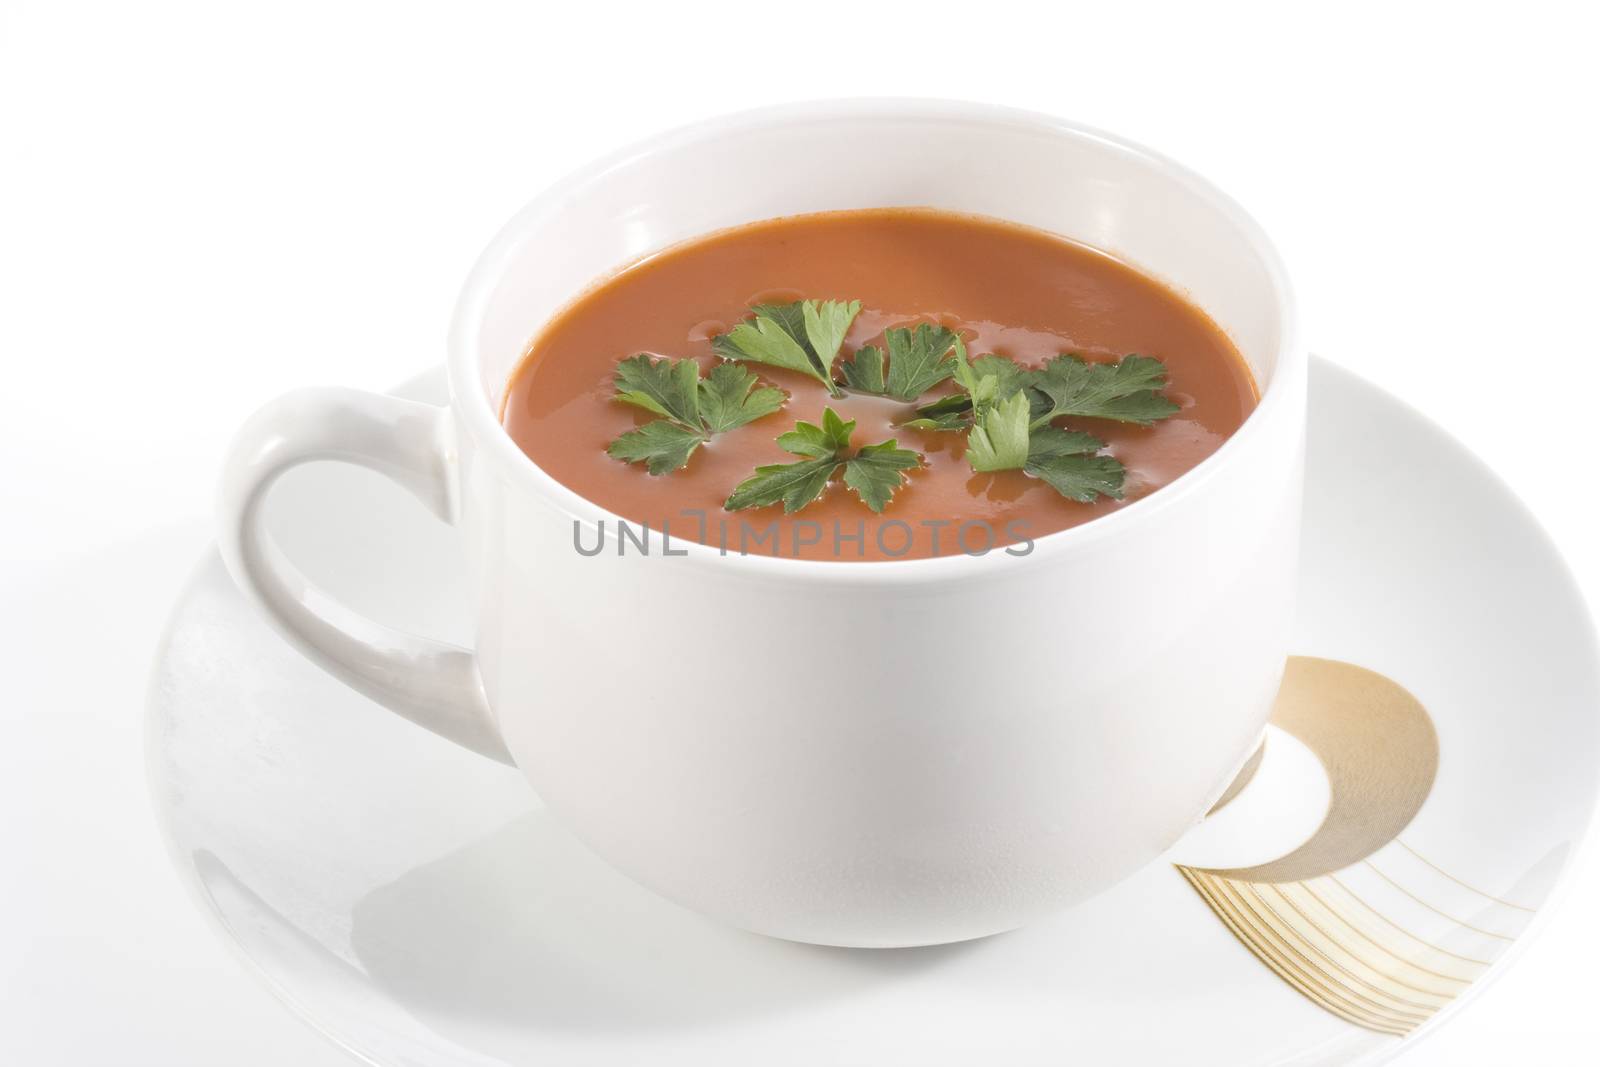 tomato soup by orcearo